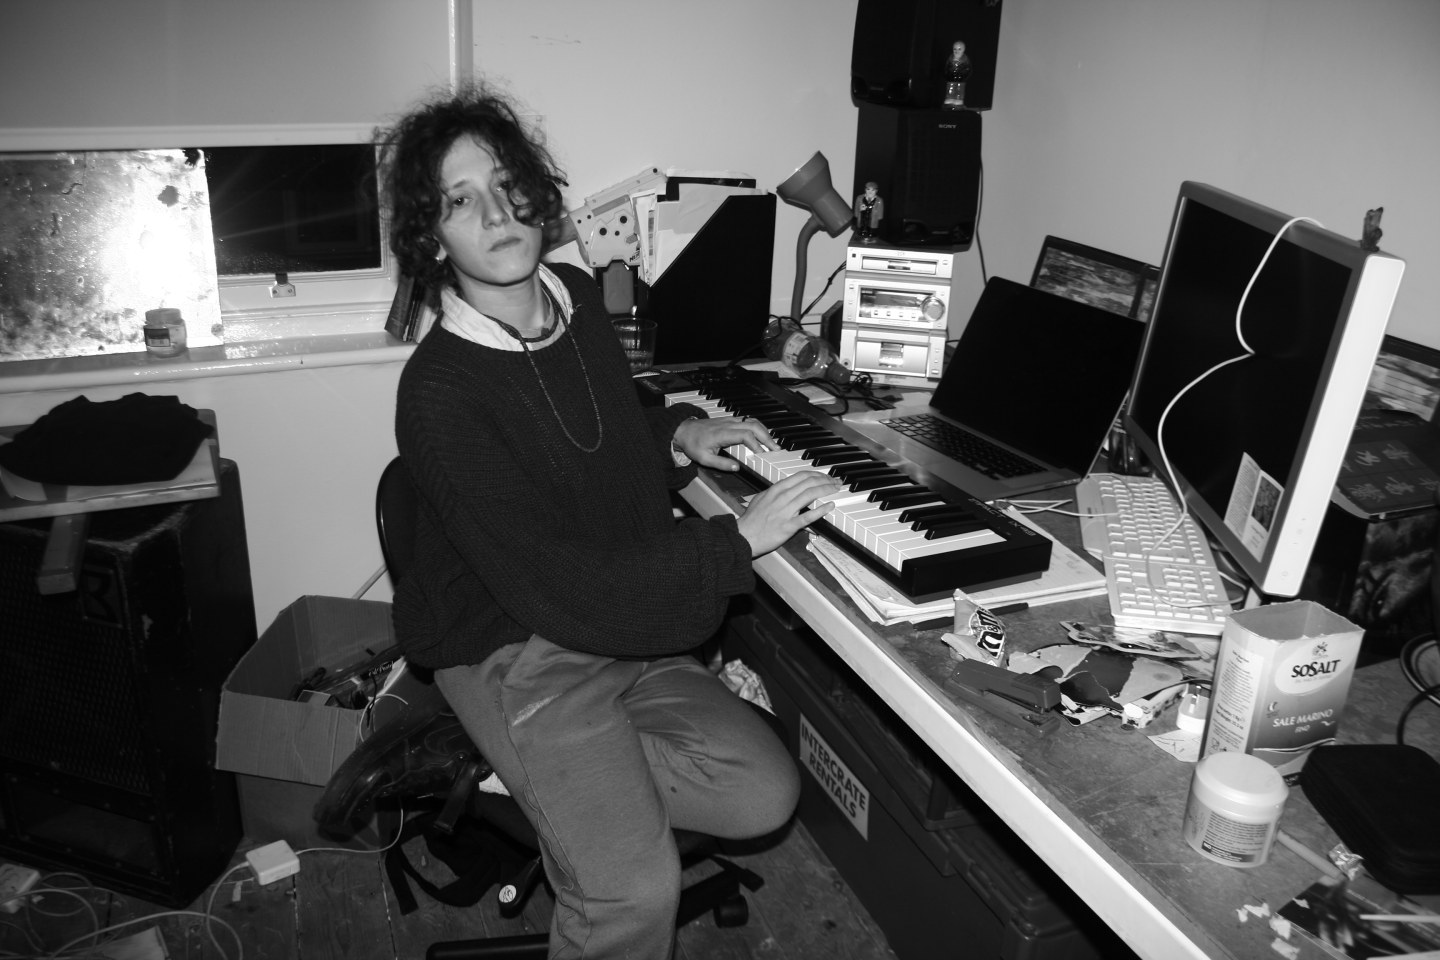 How To Write An Unforgettable Movie Score, According To Mica Levi